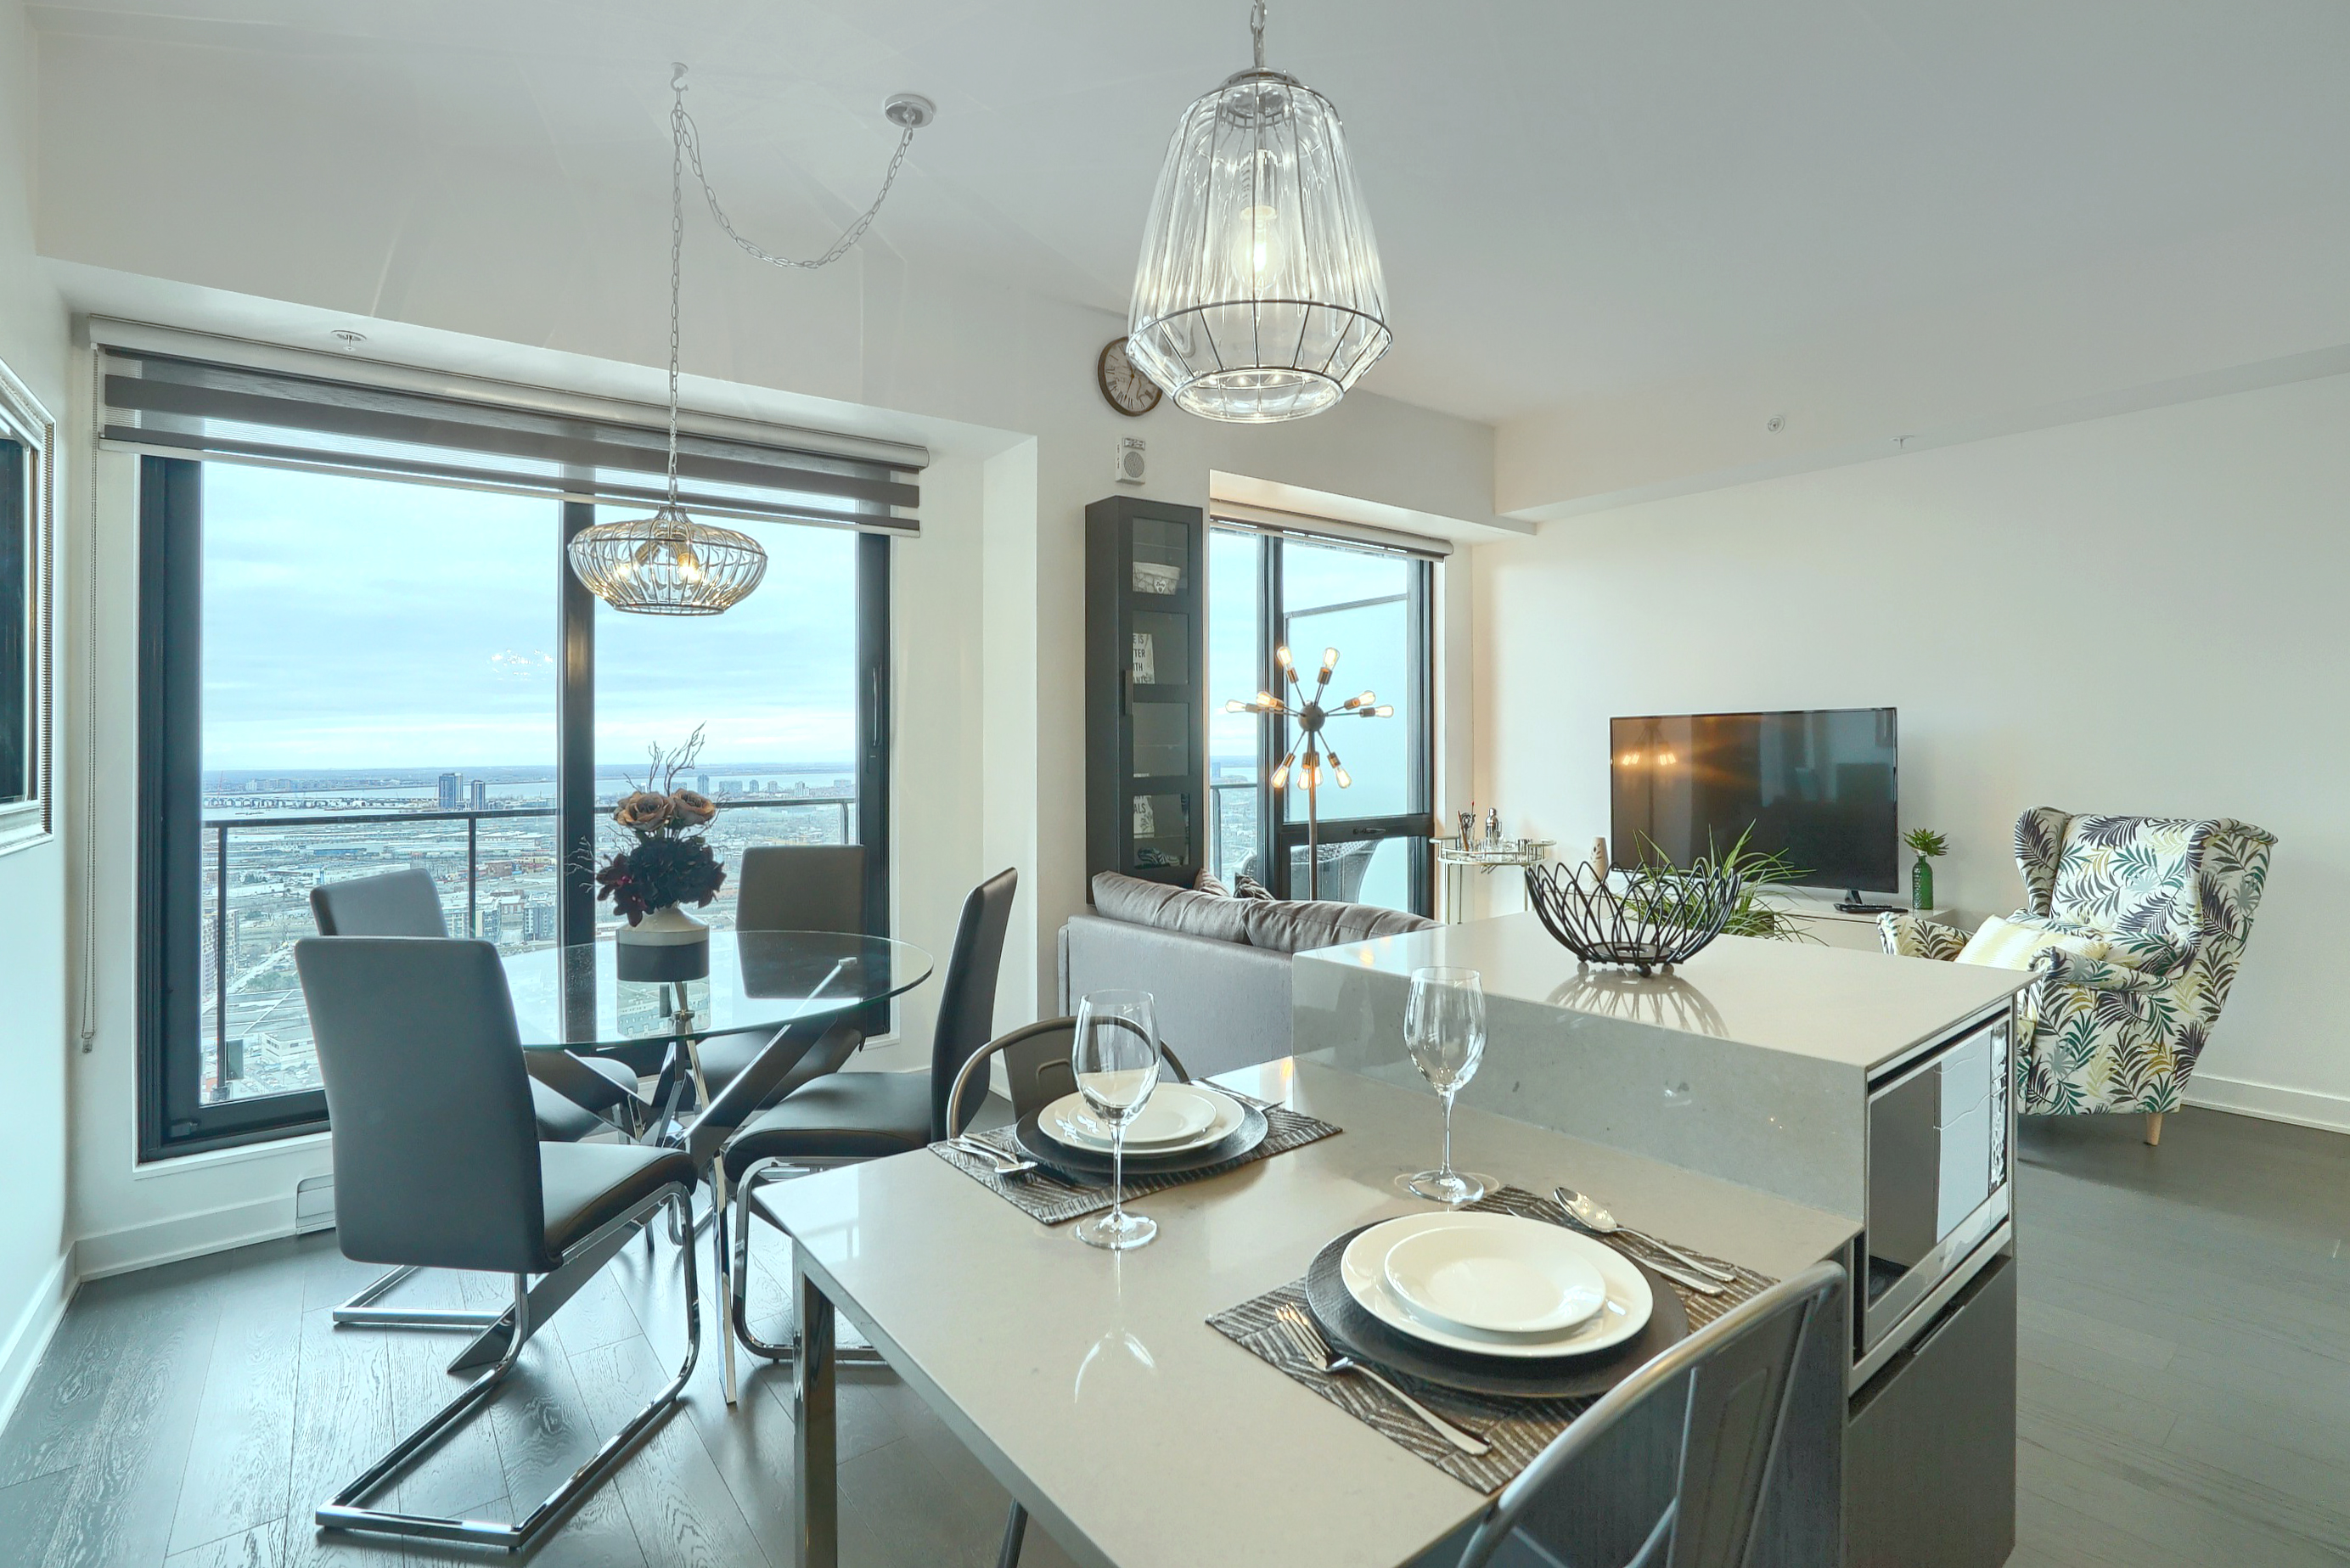 View from the kitchen into the dining and living rooms of this ultra modern luxury furnished rental, short term, in montreal. Seating for four at the glass dining table. Seating for two at the sleek kitchenette. Floor-to-ceiling windows throughout